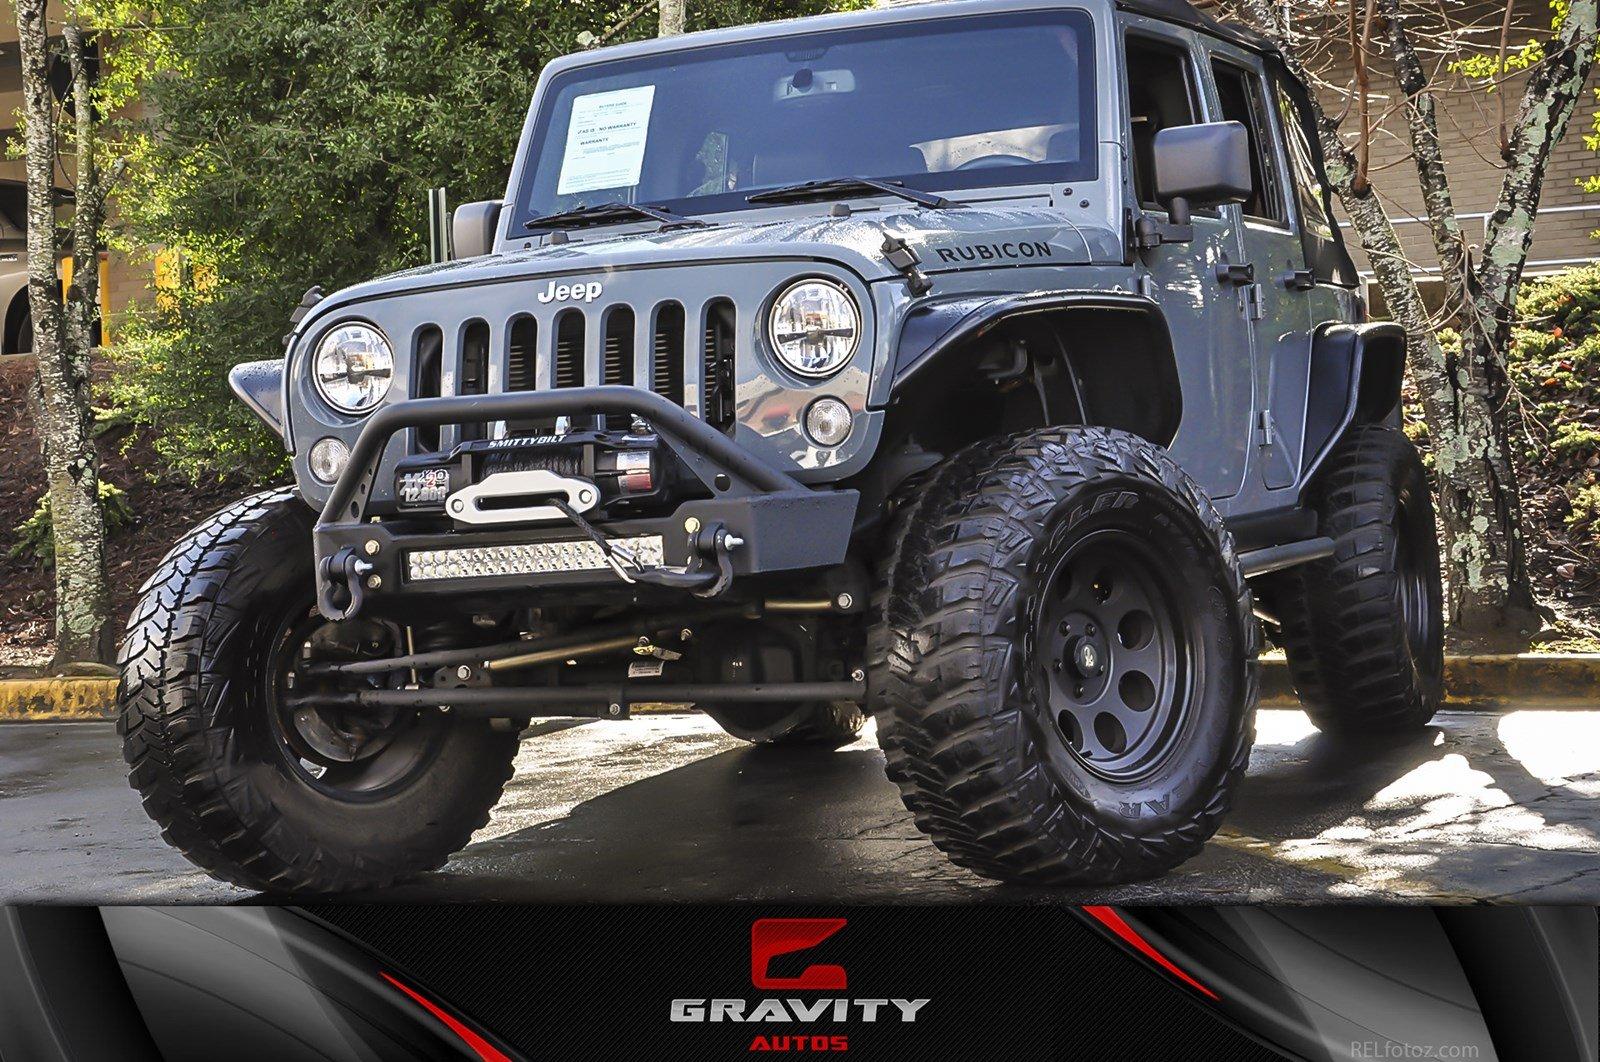 Used 2015 Jeep Wrangler Unlimited Wrangler Unlimited Rubicon For Sale  (Sold) | Gravity Autos Atlanta Stock #532827